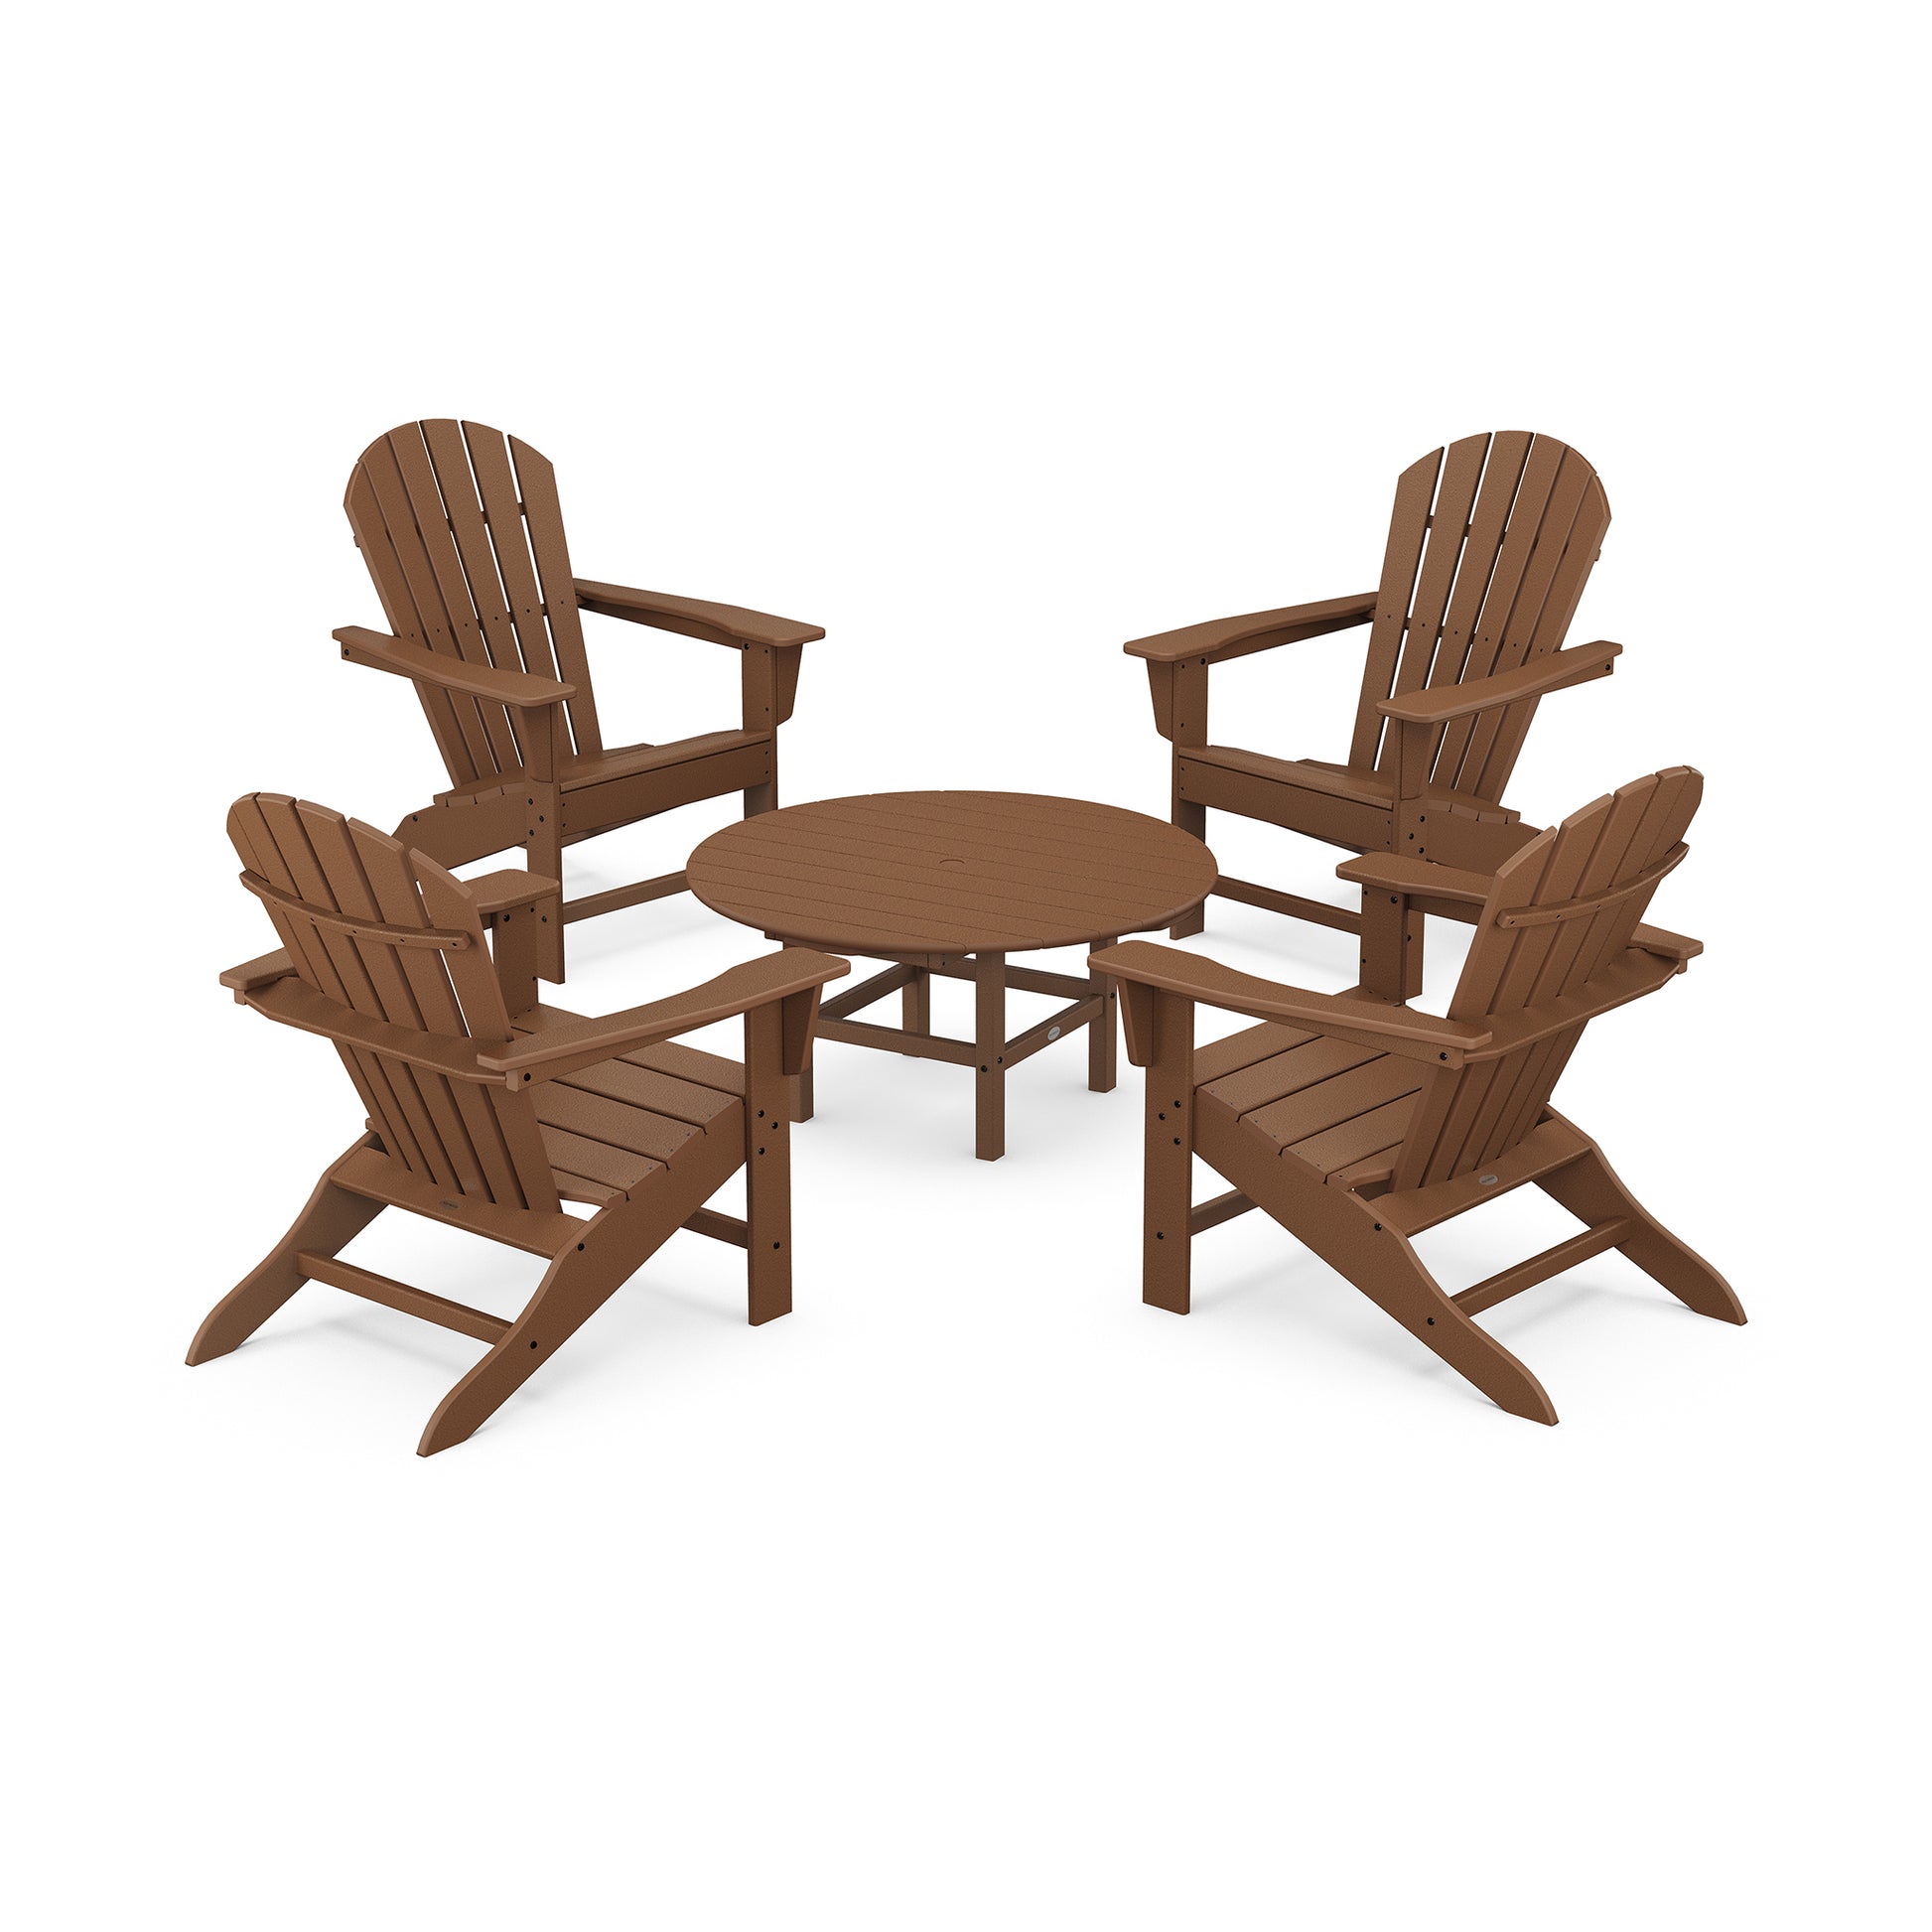 Four brown POLYWOOD South Beach chairs arranged around a small circular table, set on a plain white background. The chairs and table are made of slatted POLYWOOD®.